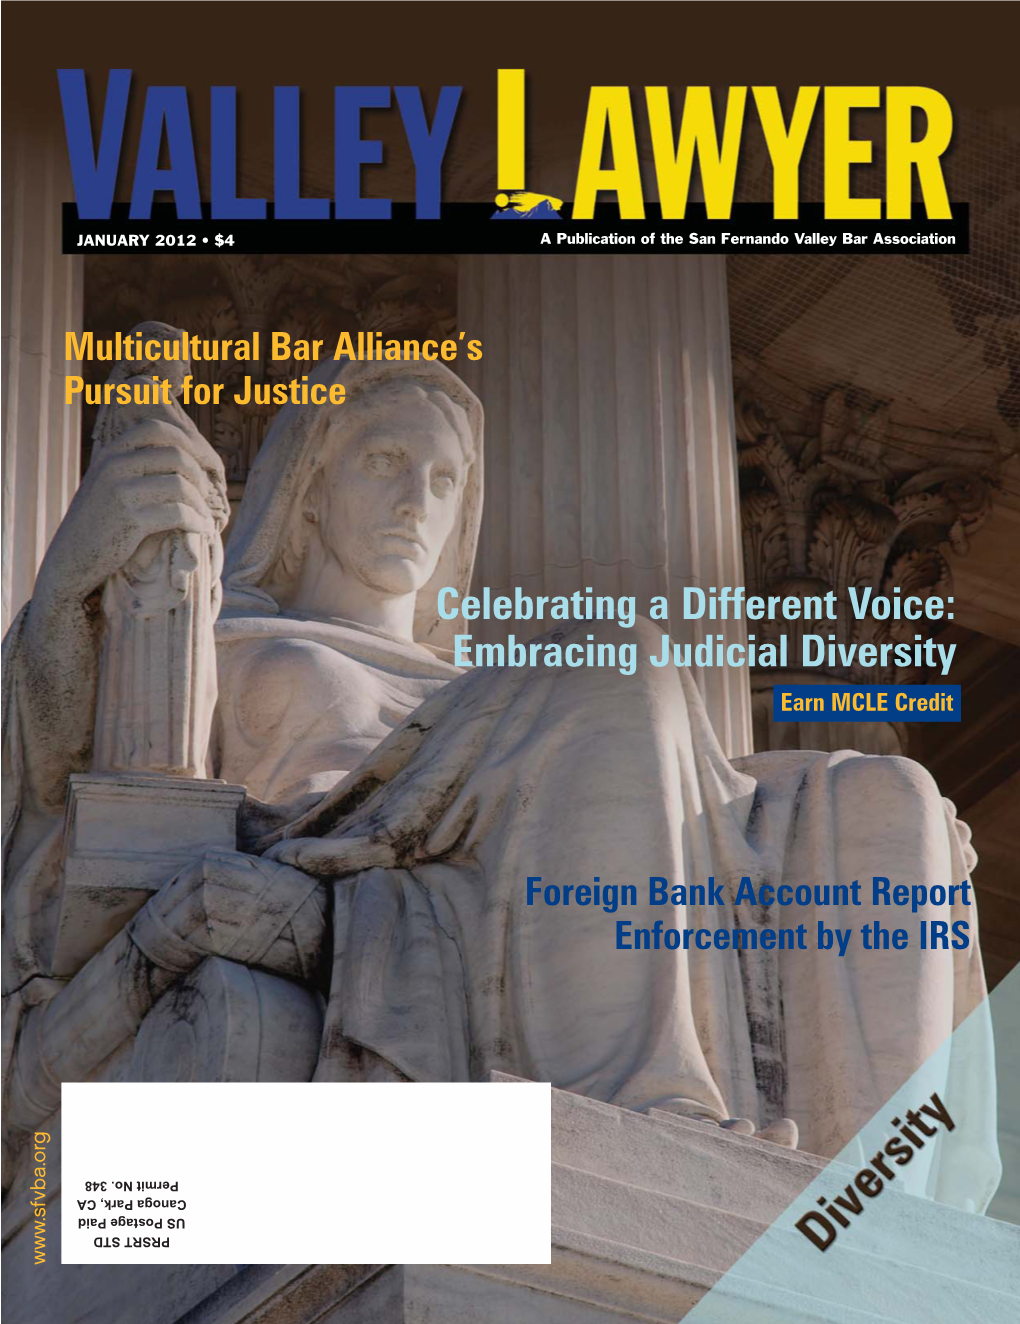 Celebrating a Different Voice: Embracing Judicial Diversity Earn MCLE Credit